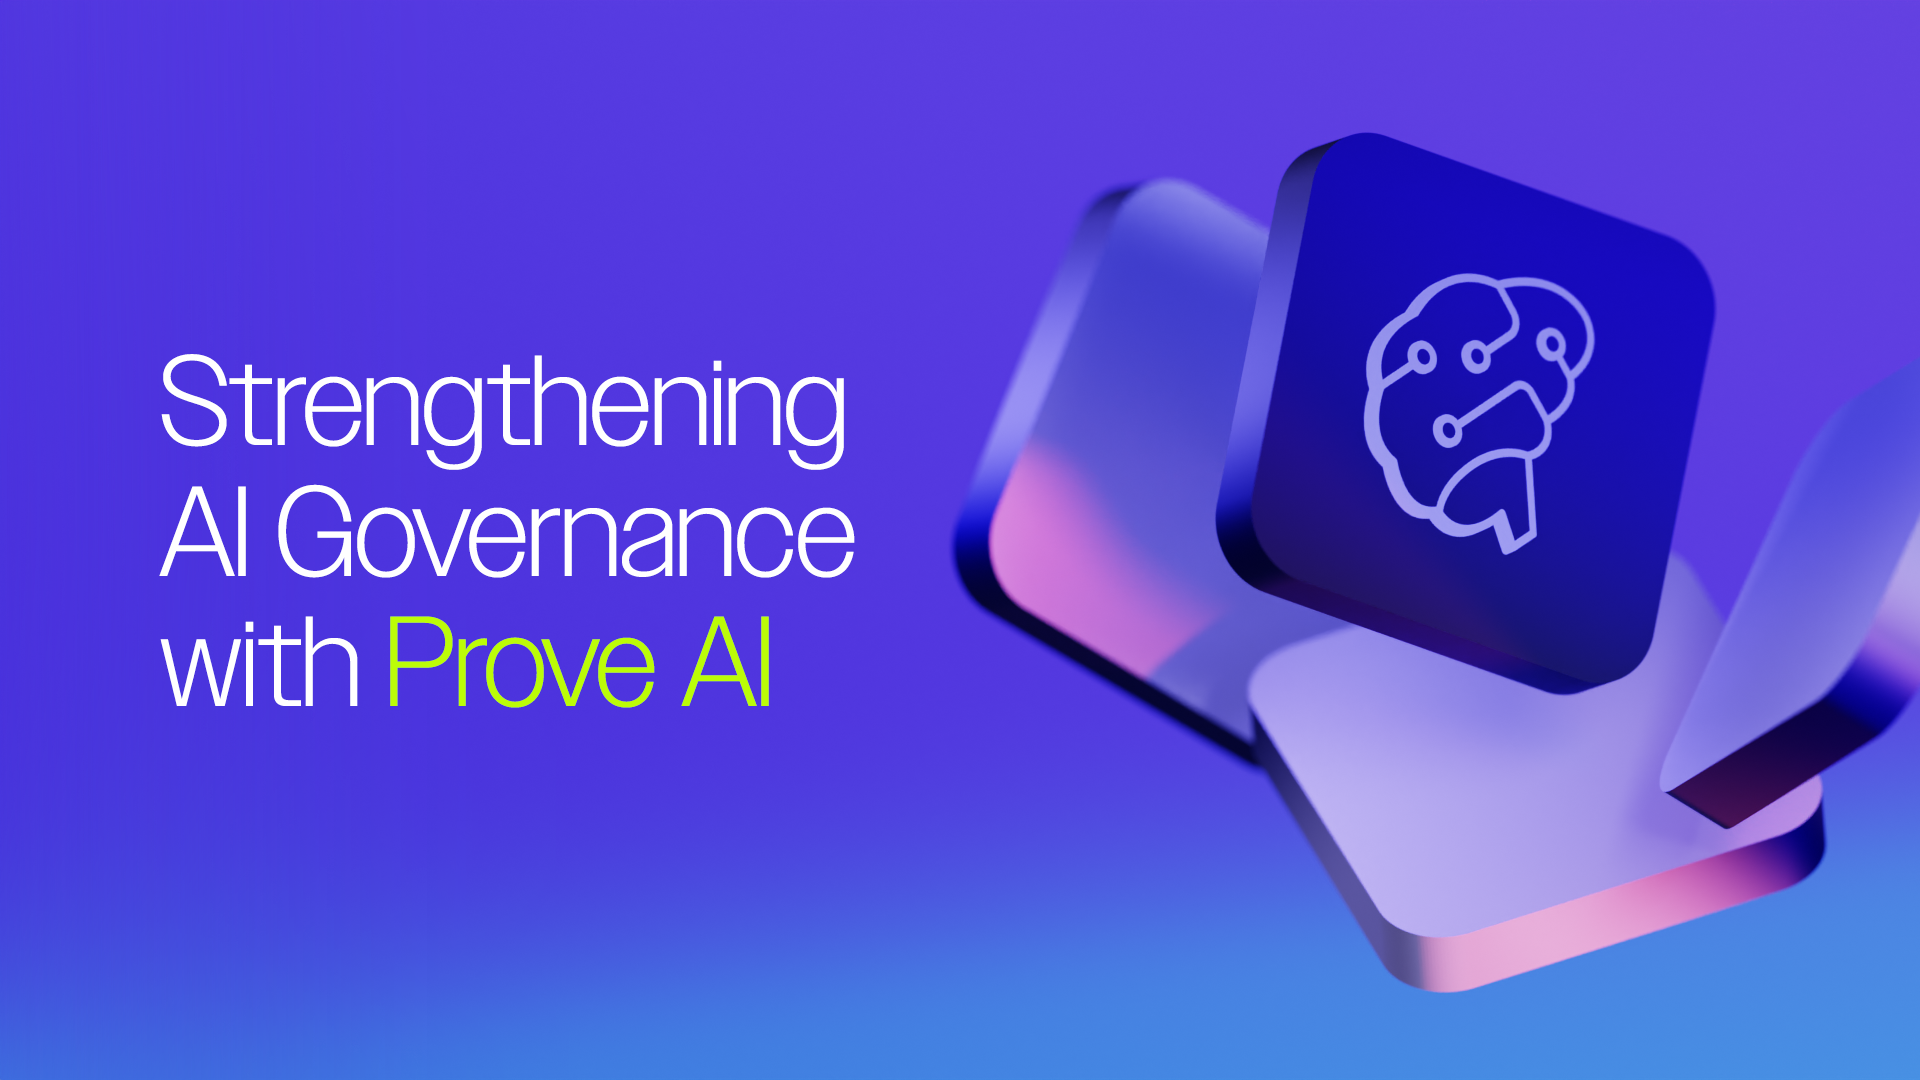 Strengthening AI Governance with Prove AI